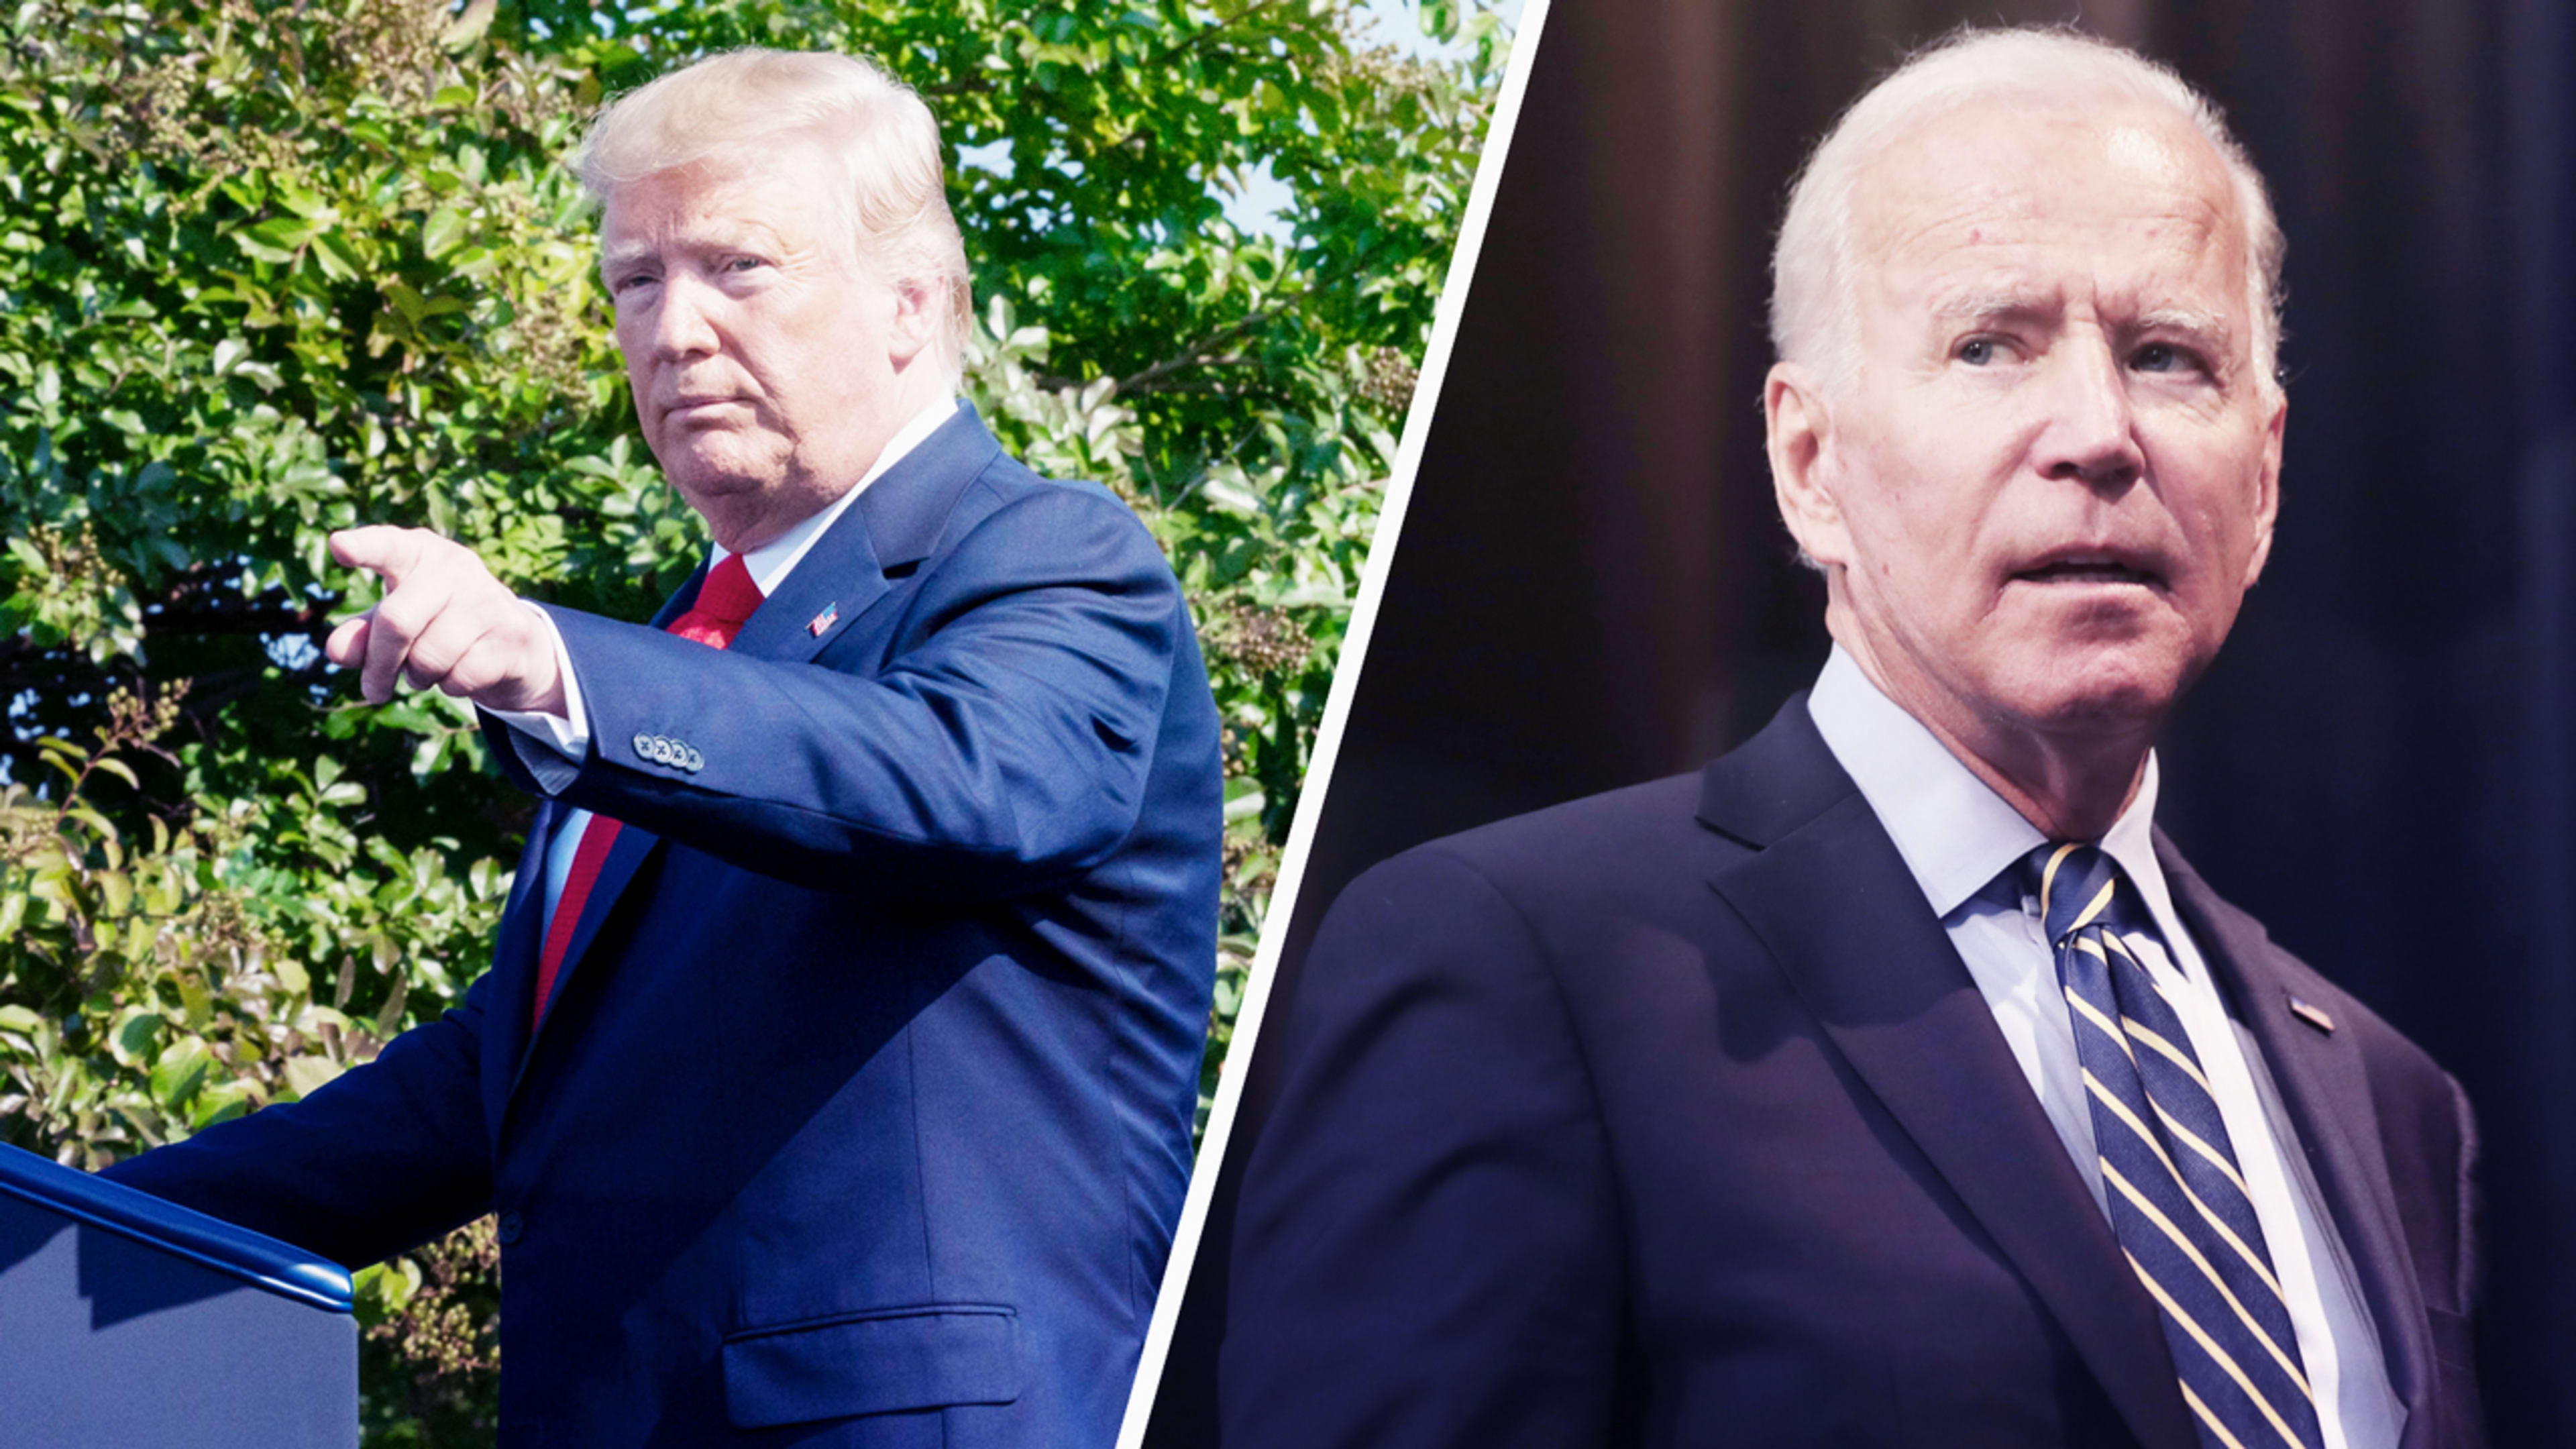 Andrew Yang and Donald Trump get more support than Joe Biden from Big Tech workers